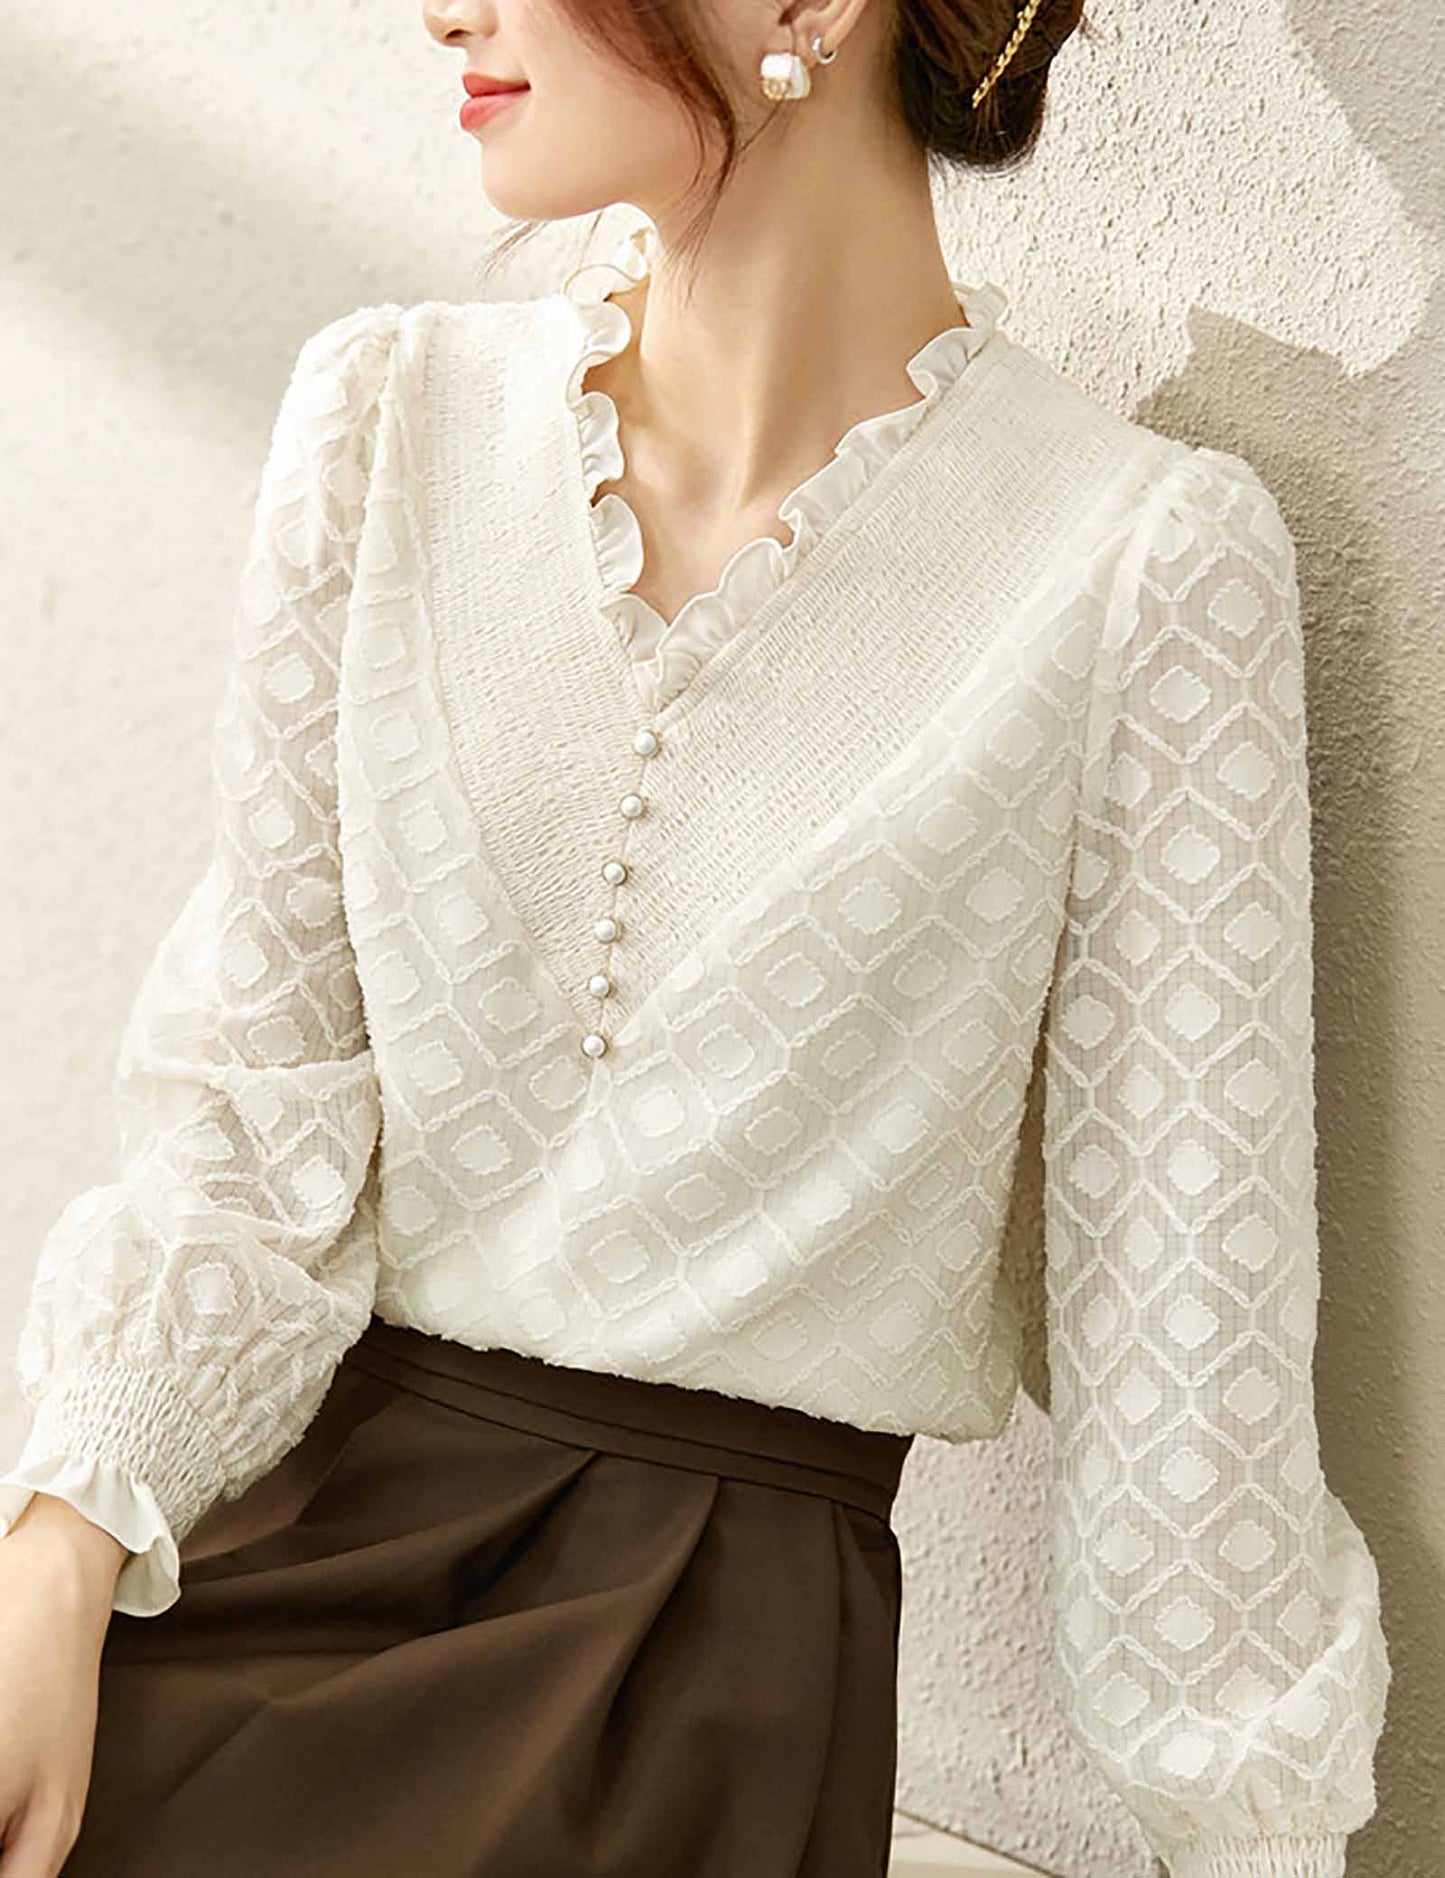 Long sleeves V neck Button Solid Blouse shirt